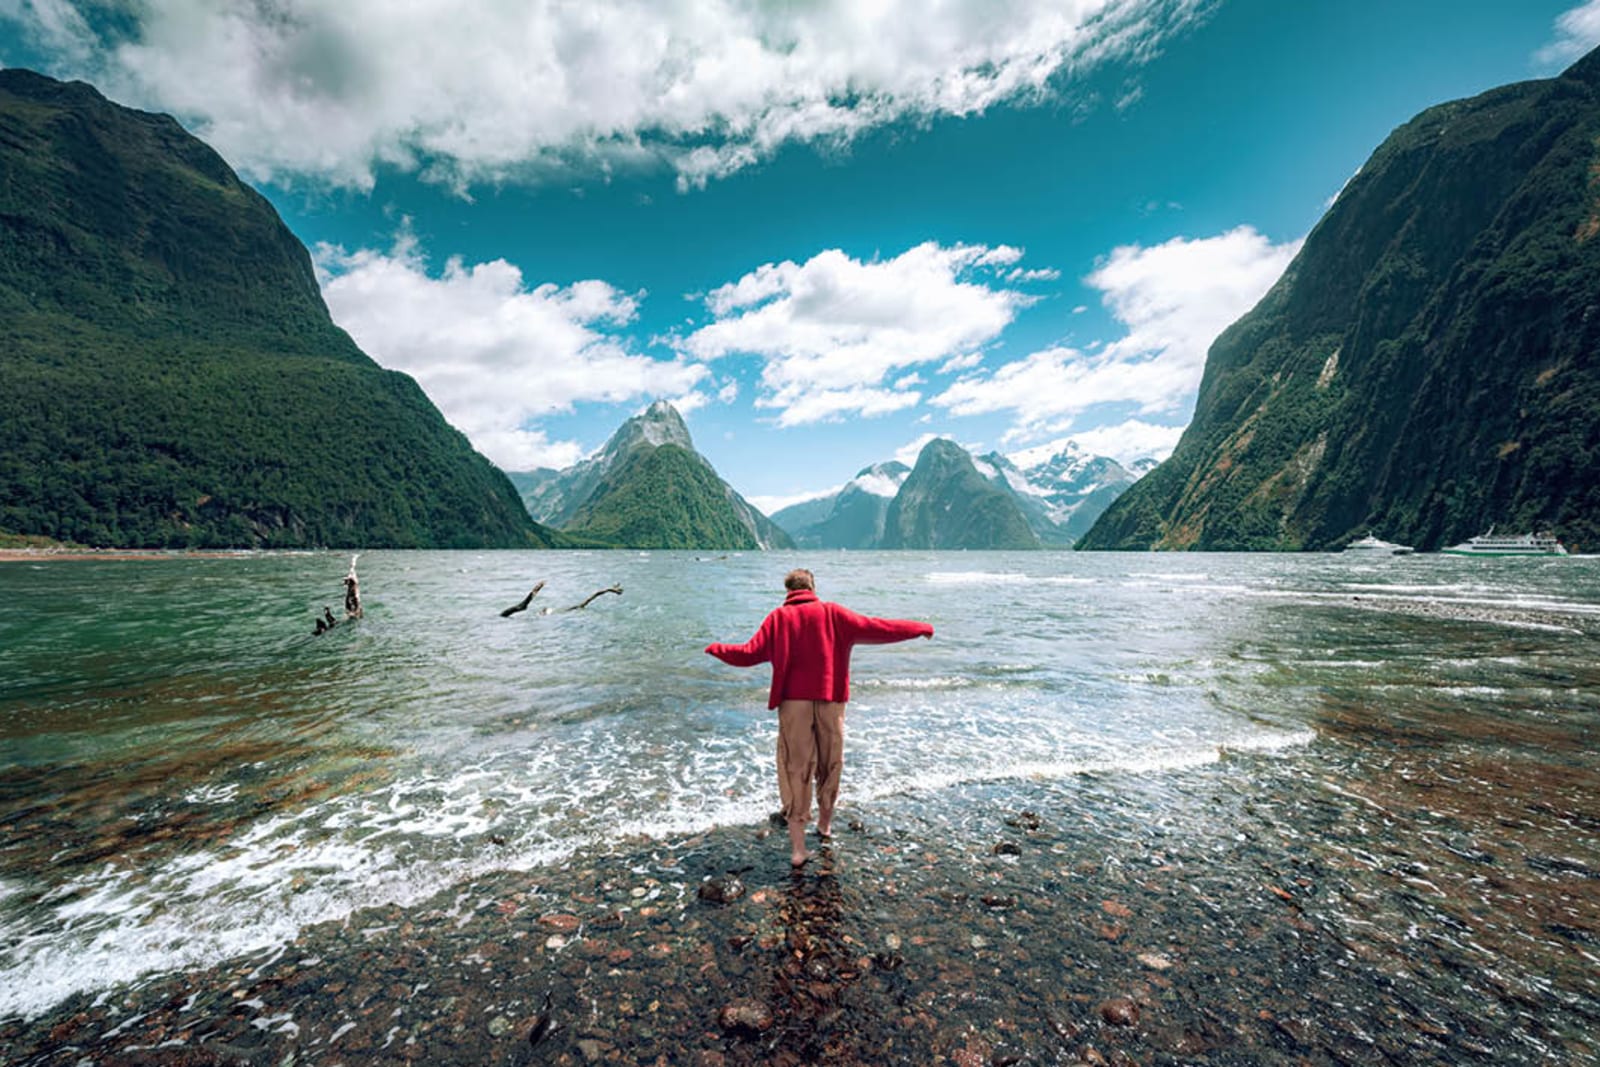 A person standing in Milford Sound, part of Fiordland National Park in New Zealand